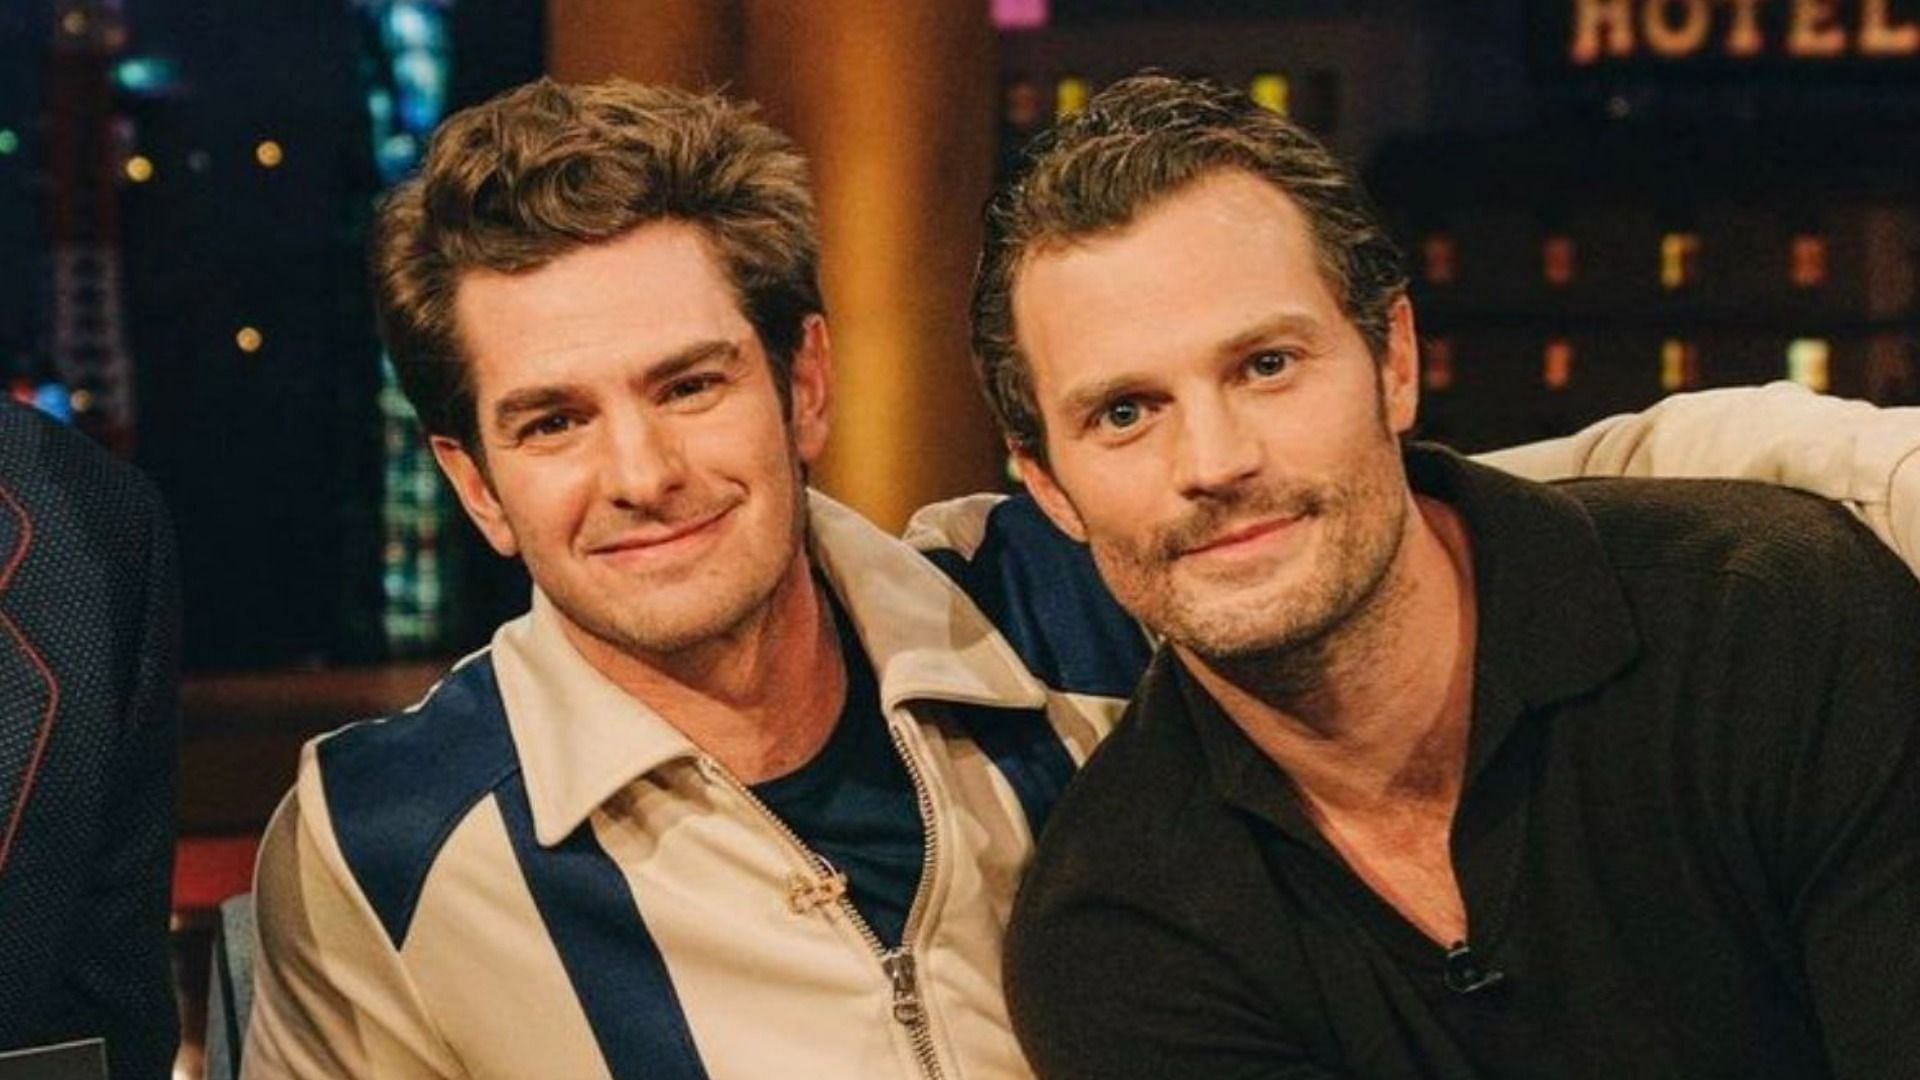 Jamie Dornan and Andrew Garfield used to be roommates in the late 2000s (Image via Twitter/ @andrgarfields)